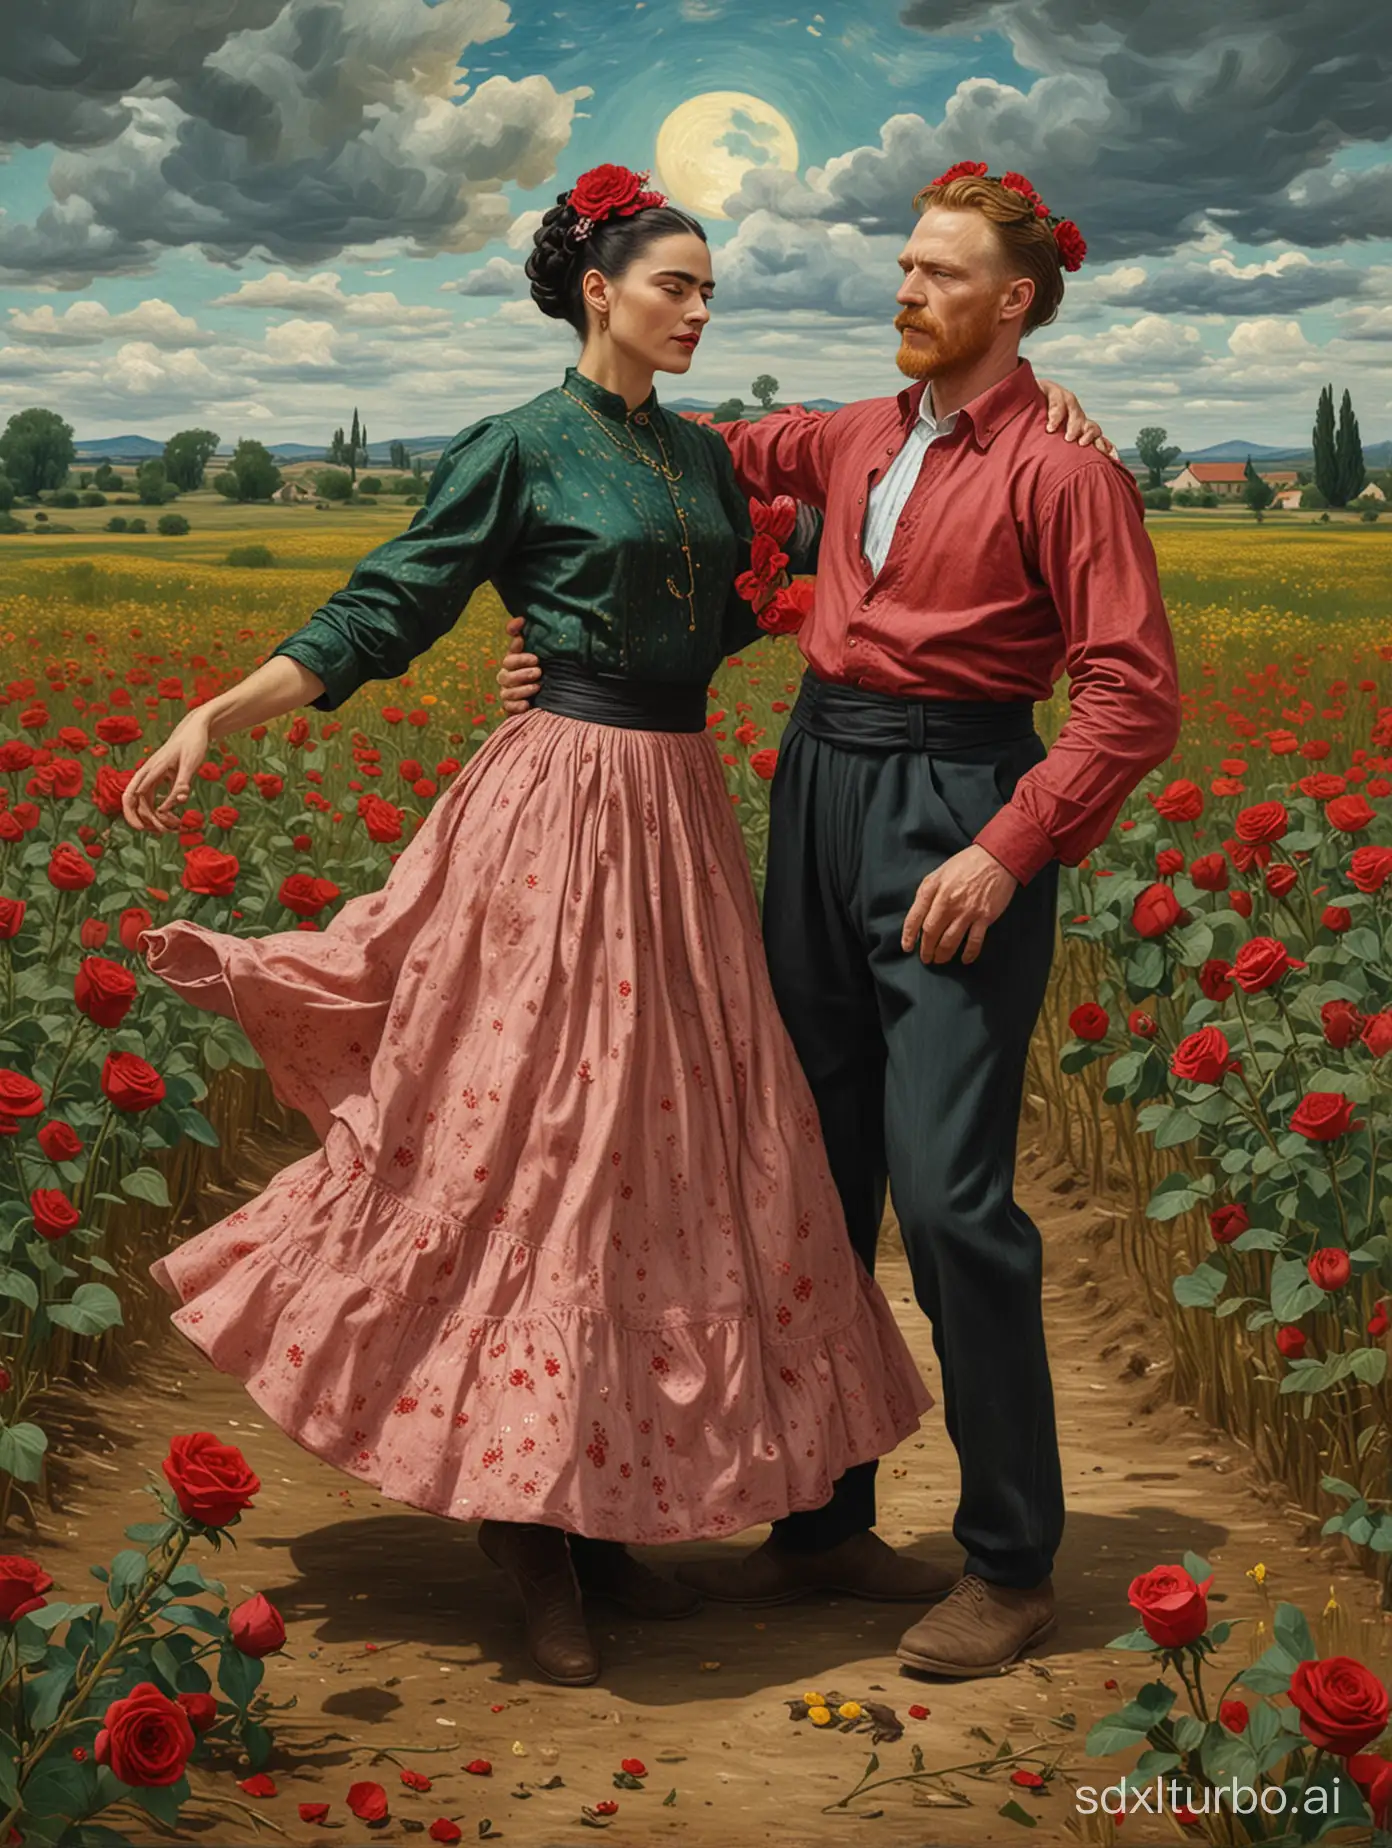 "Vincent van gogh and frida kahlo dancing on the corpse of a rose in the field"

van gogh style